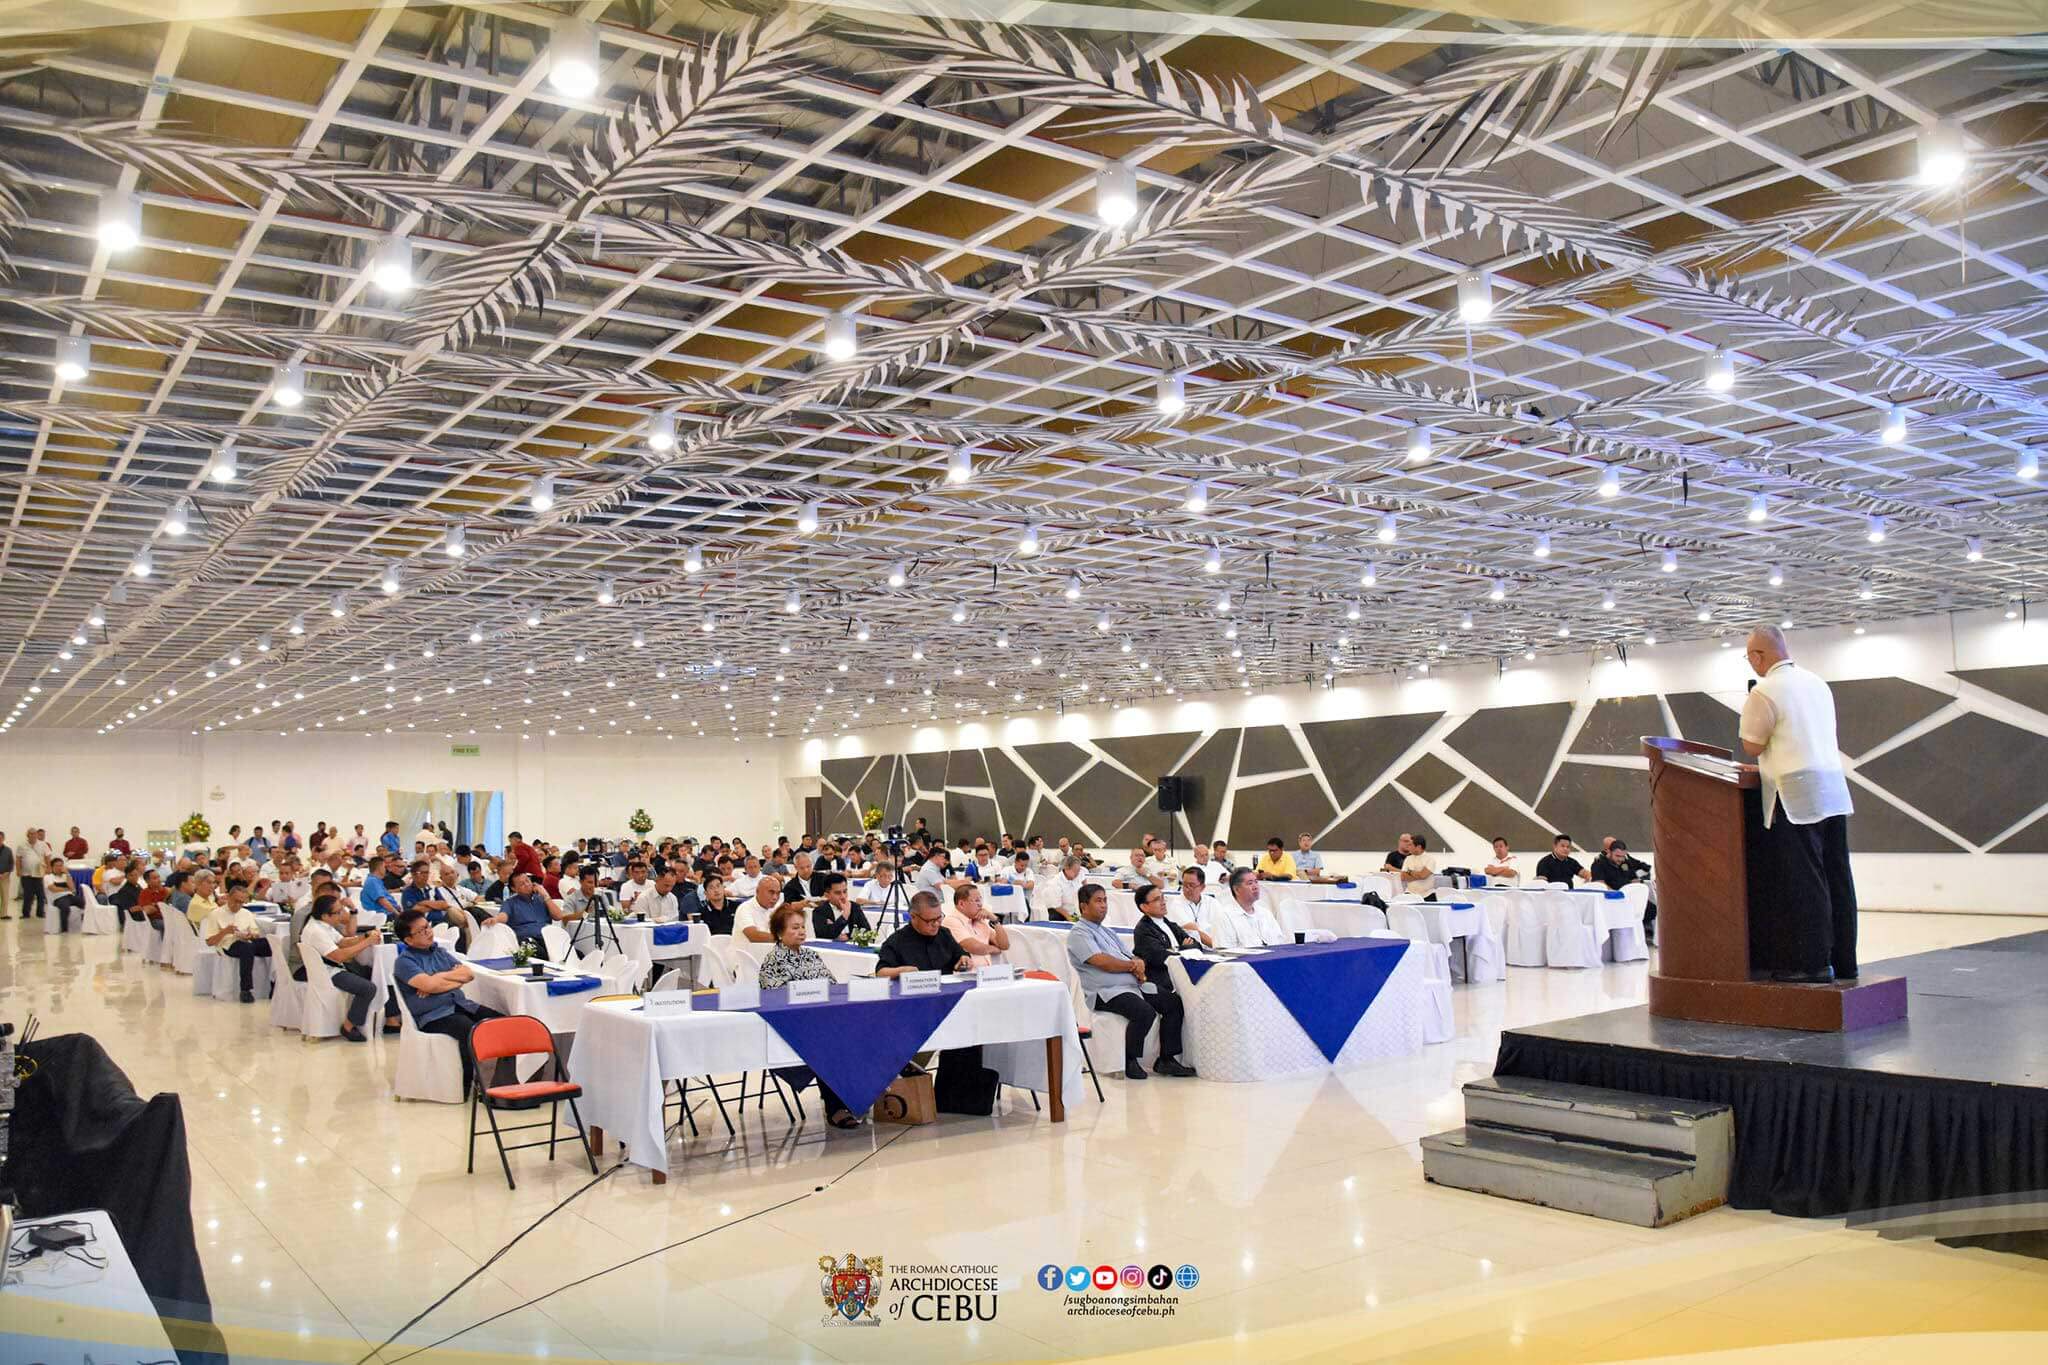 WORK IN PROGRESS. Cebu Archbishop Jose Palma gives his welcome message during the clergy gathering to discuss the move to break up the archdiocese. Palma said the study on Sugbuswak is a work in progress and that nothing is final yet. (Photo from the Archdiocese of Cebu Facebook page.) 